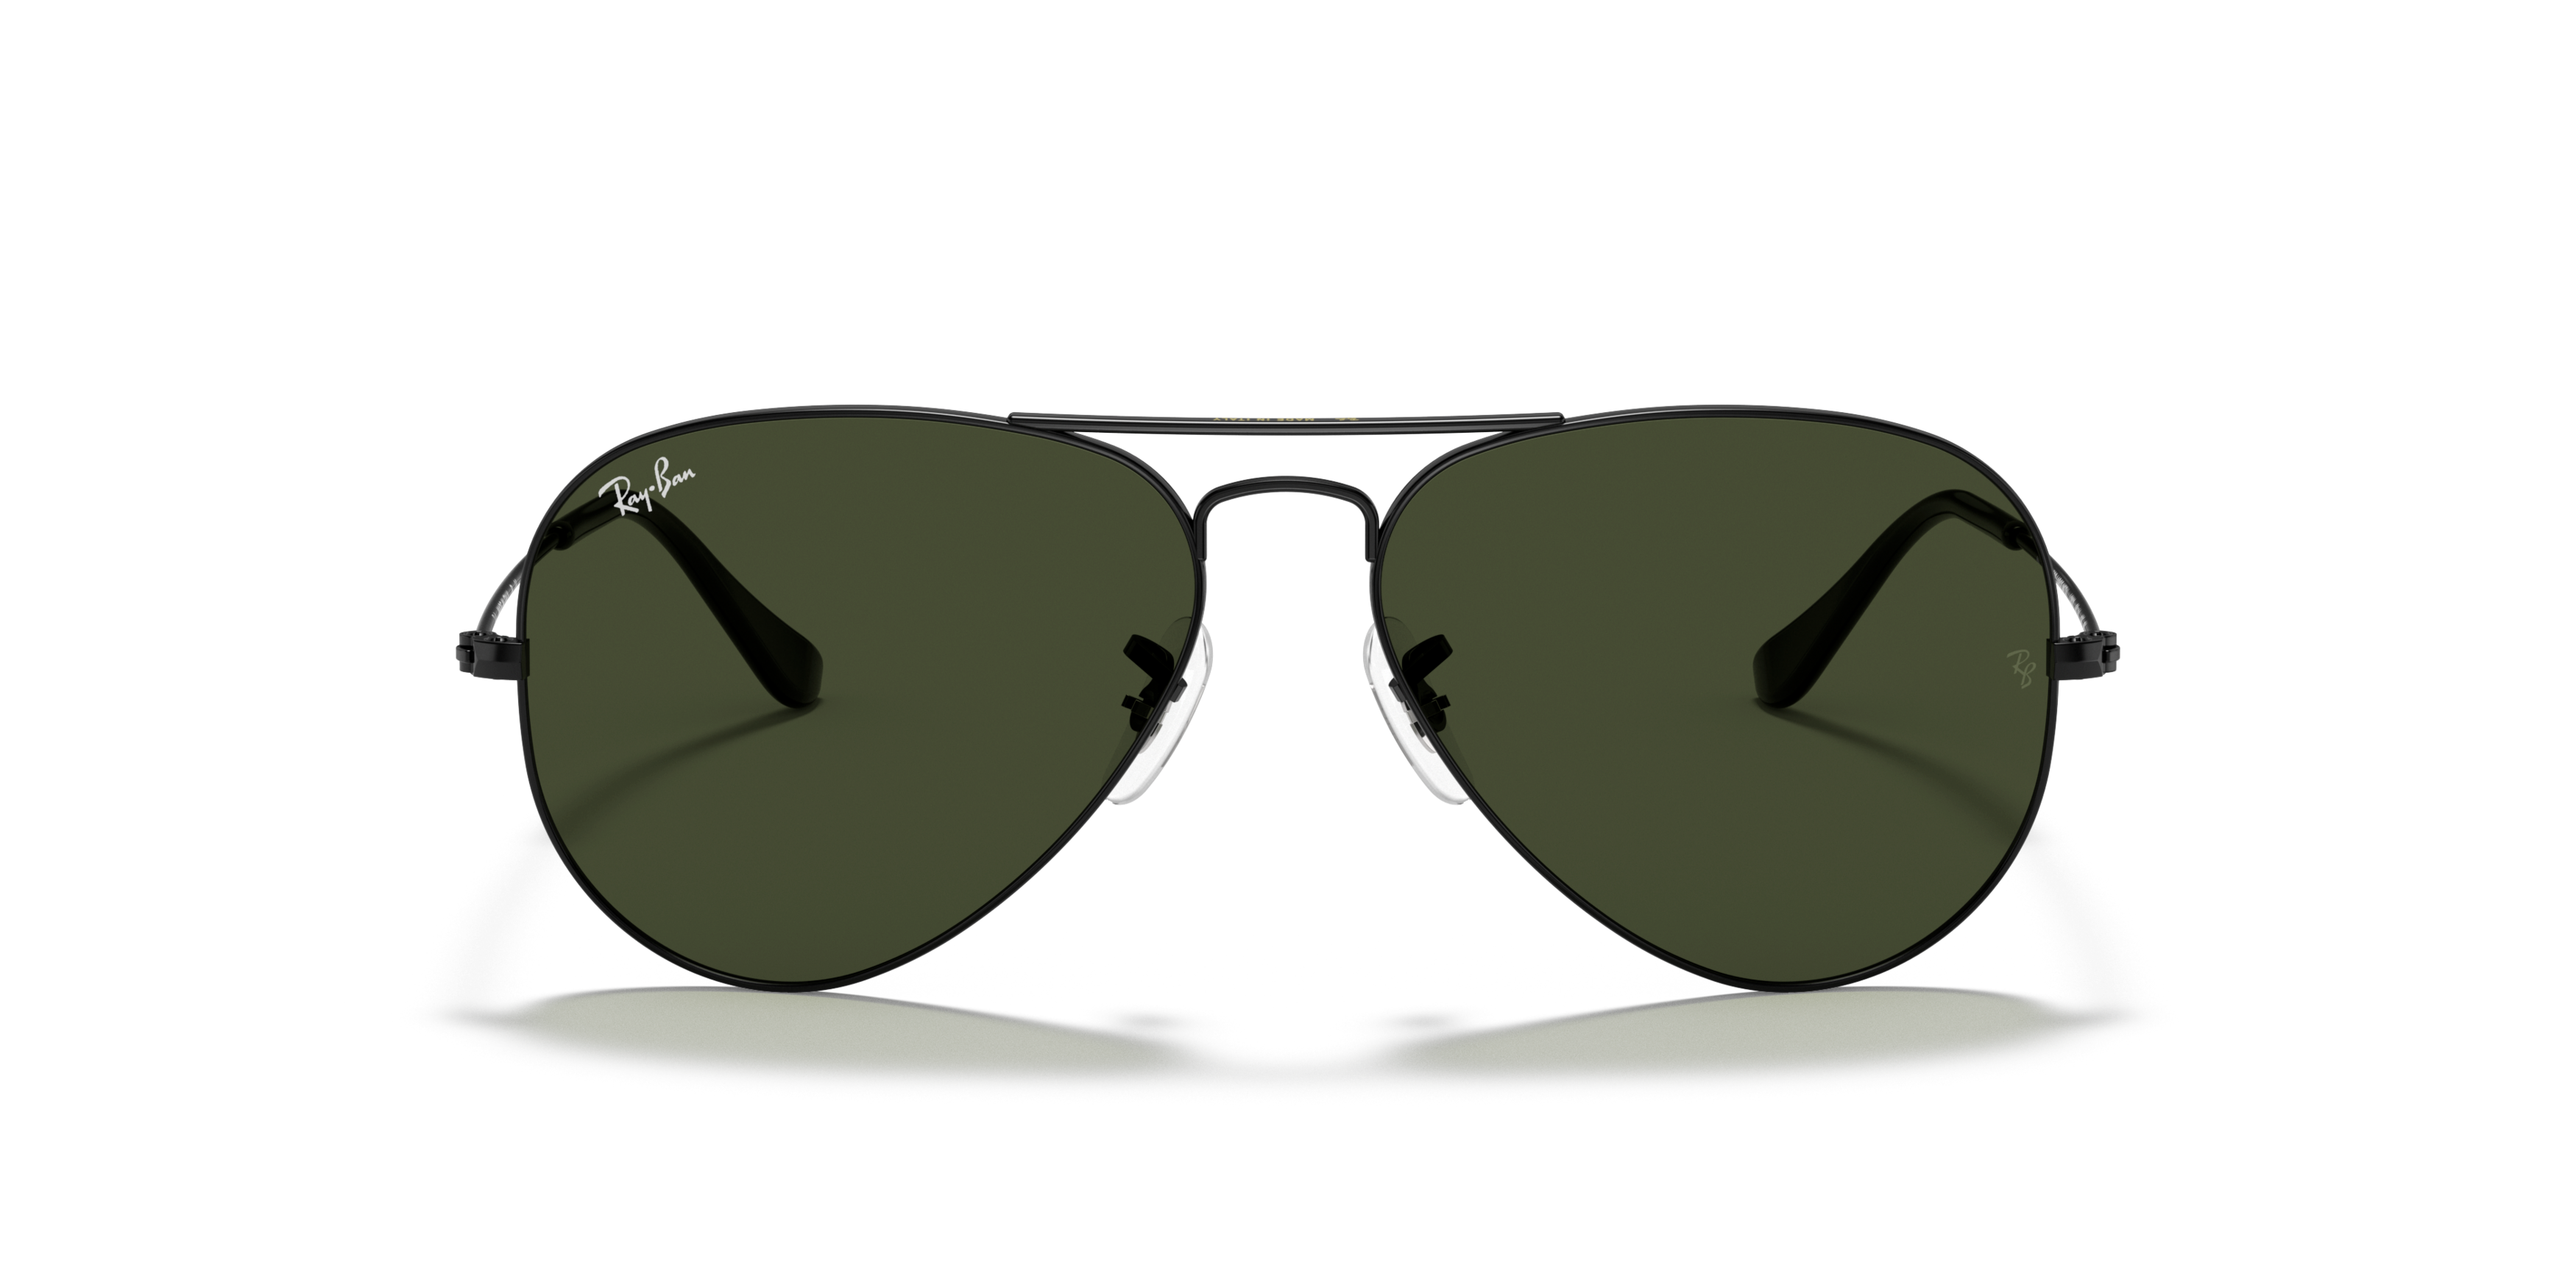 [products.image.front] Ray-Ban Aviator Classic RB3025 L2823